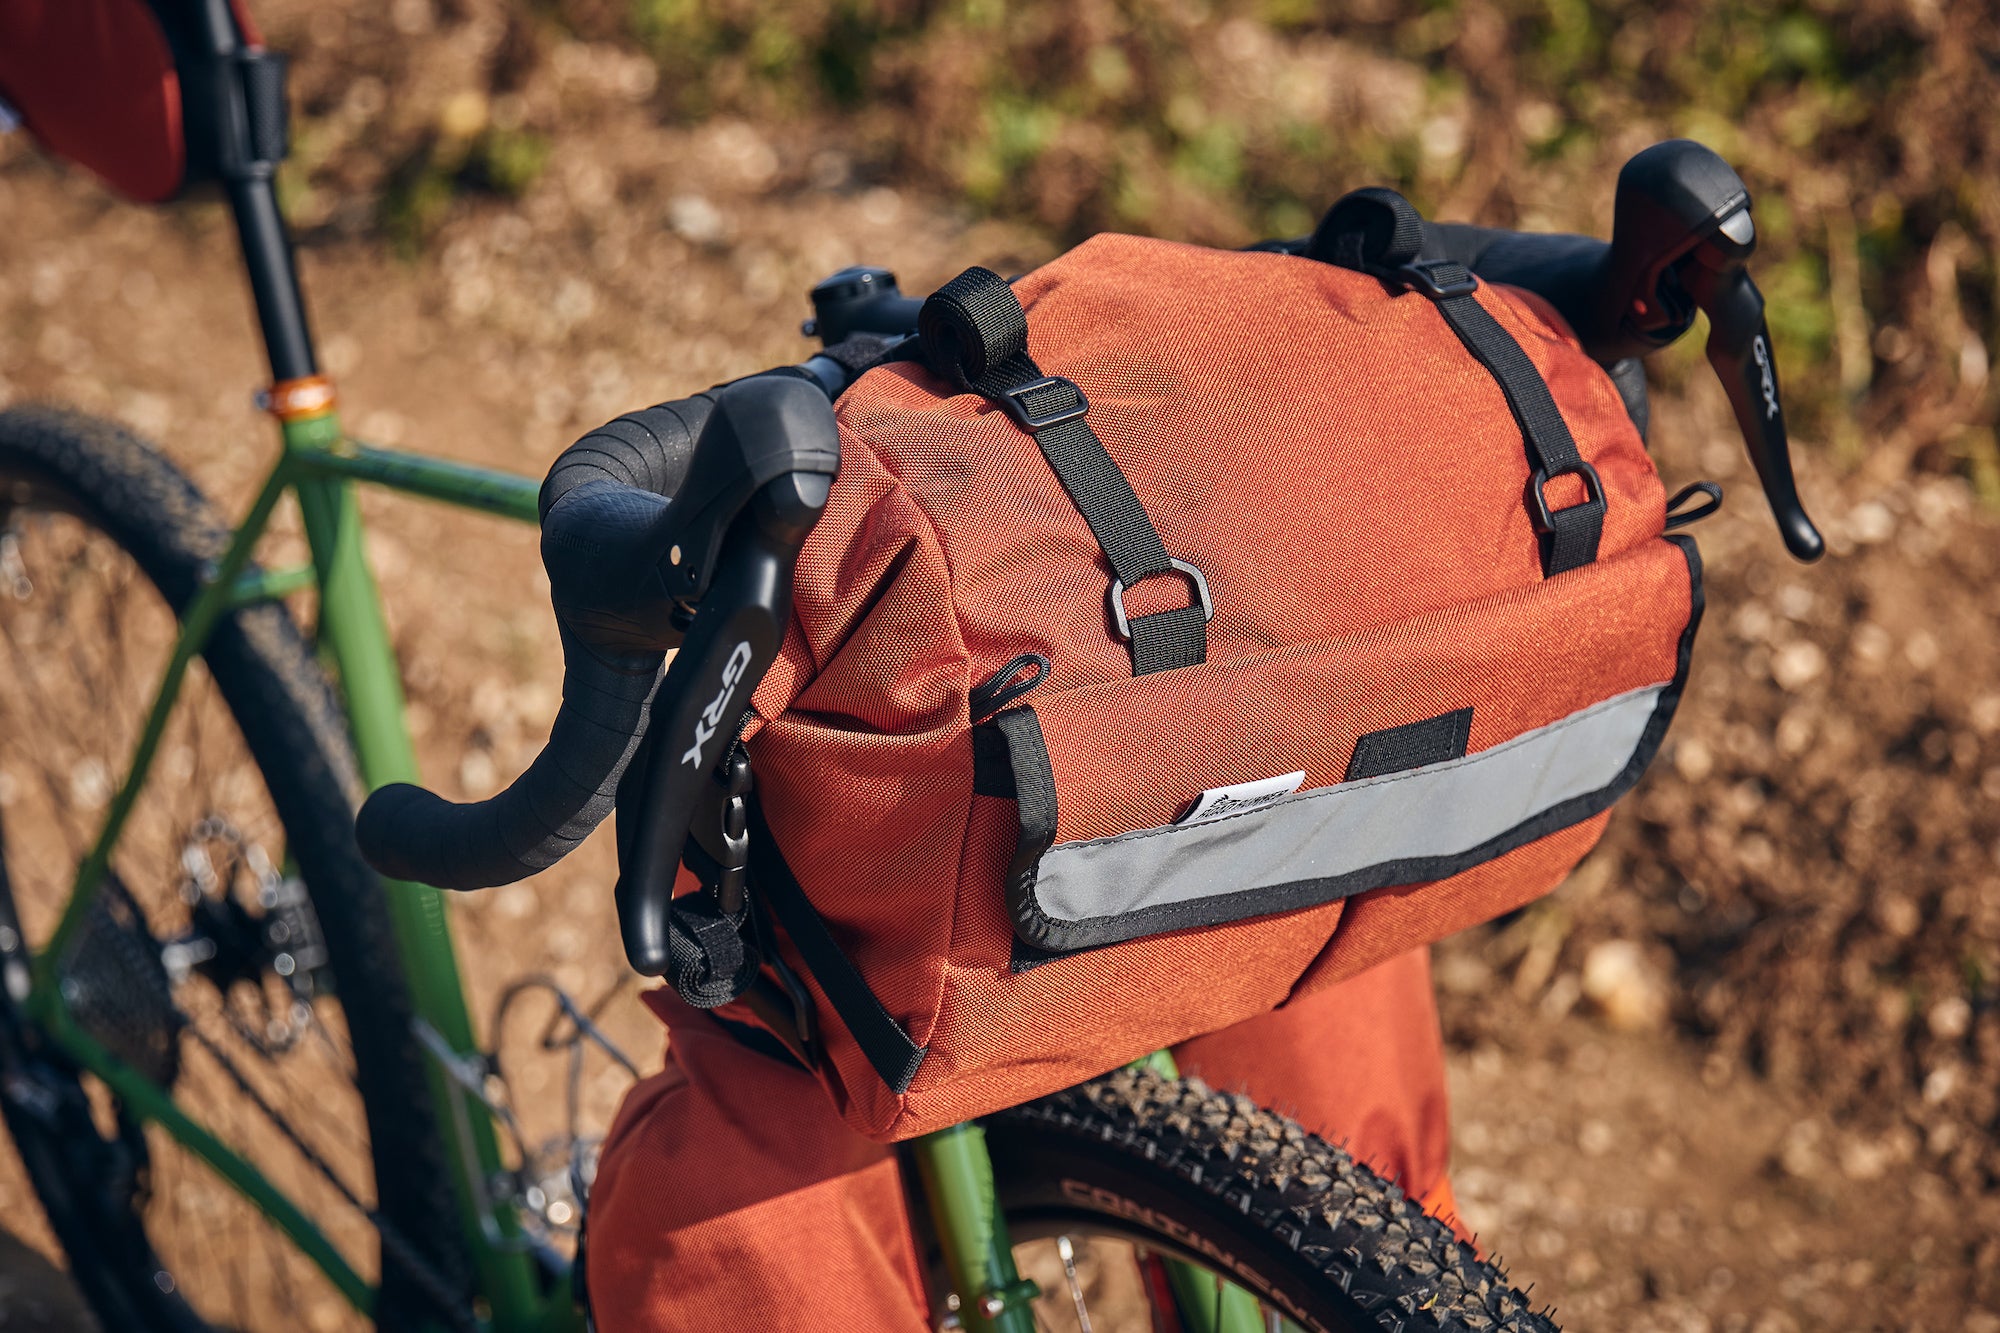 Fairlight LS1 with Road Runner Bikepacking Bags preview of the Middle Earth Jammer